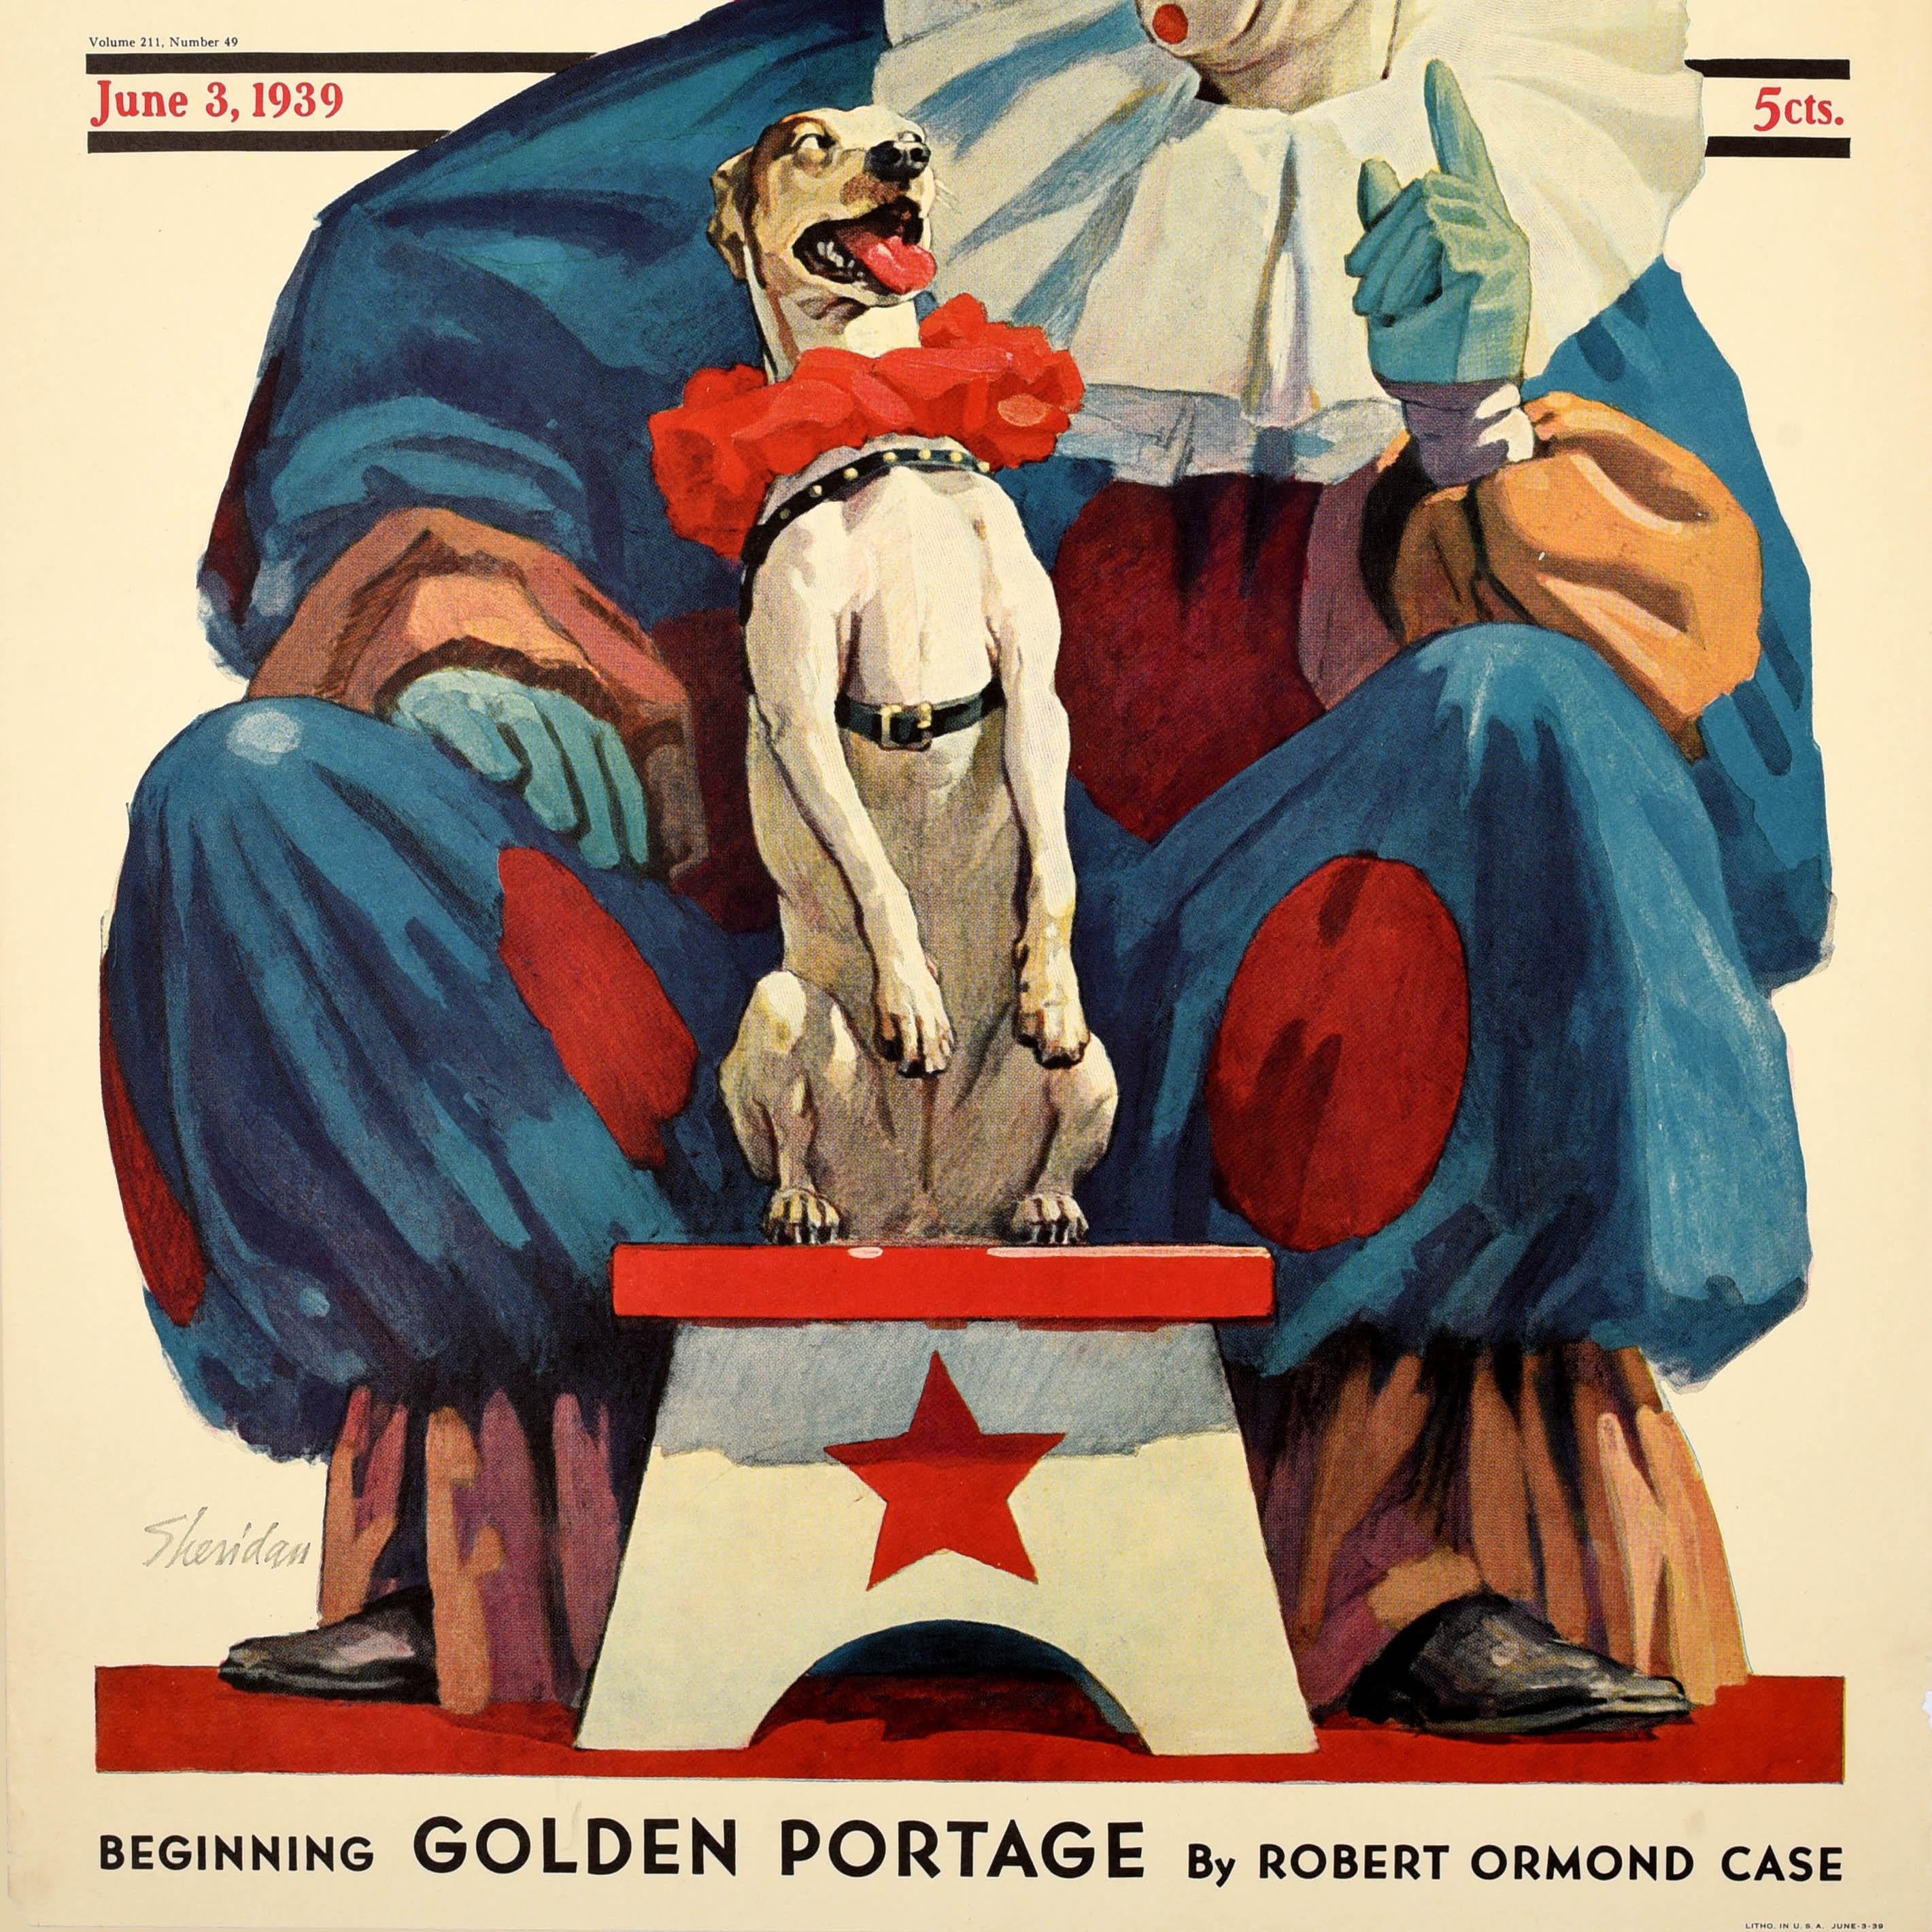 Original vintage advertising poster for the 3 June 1939 issue of The Saturday Evening Post illustrated magazine featuring a clown in a blue and red polka dot outfit teaching a dog tricks on a white and red star stool, the title text above and book